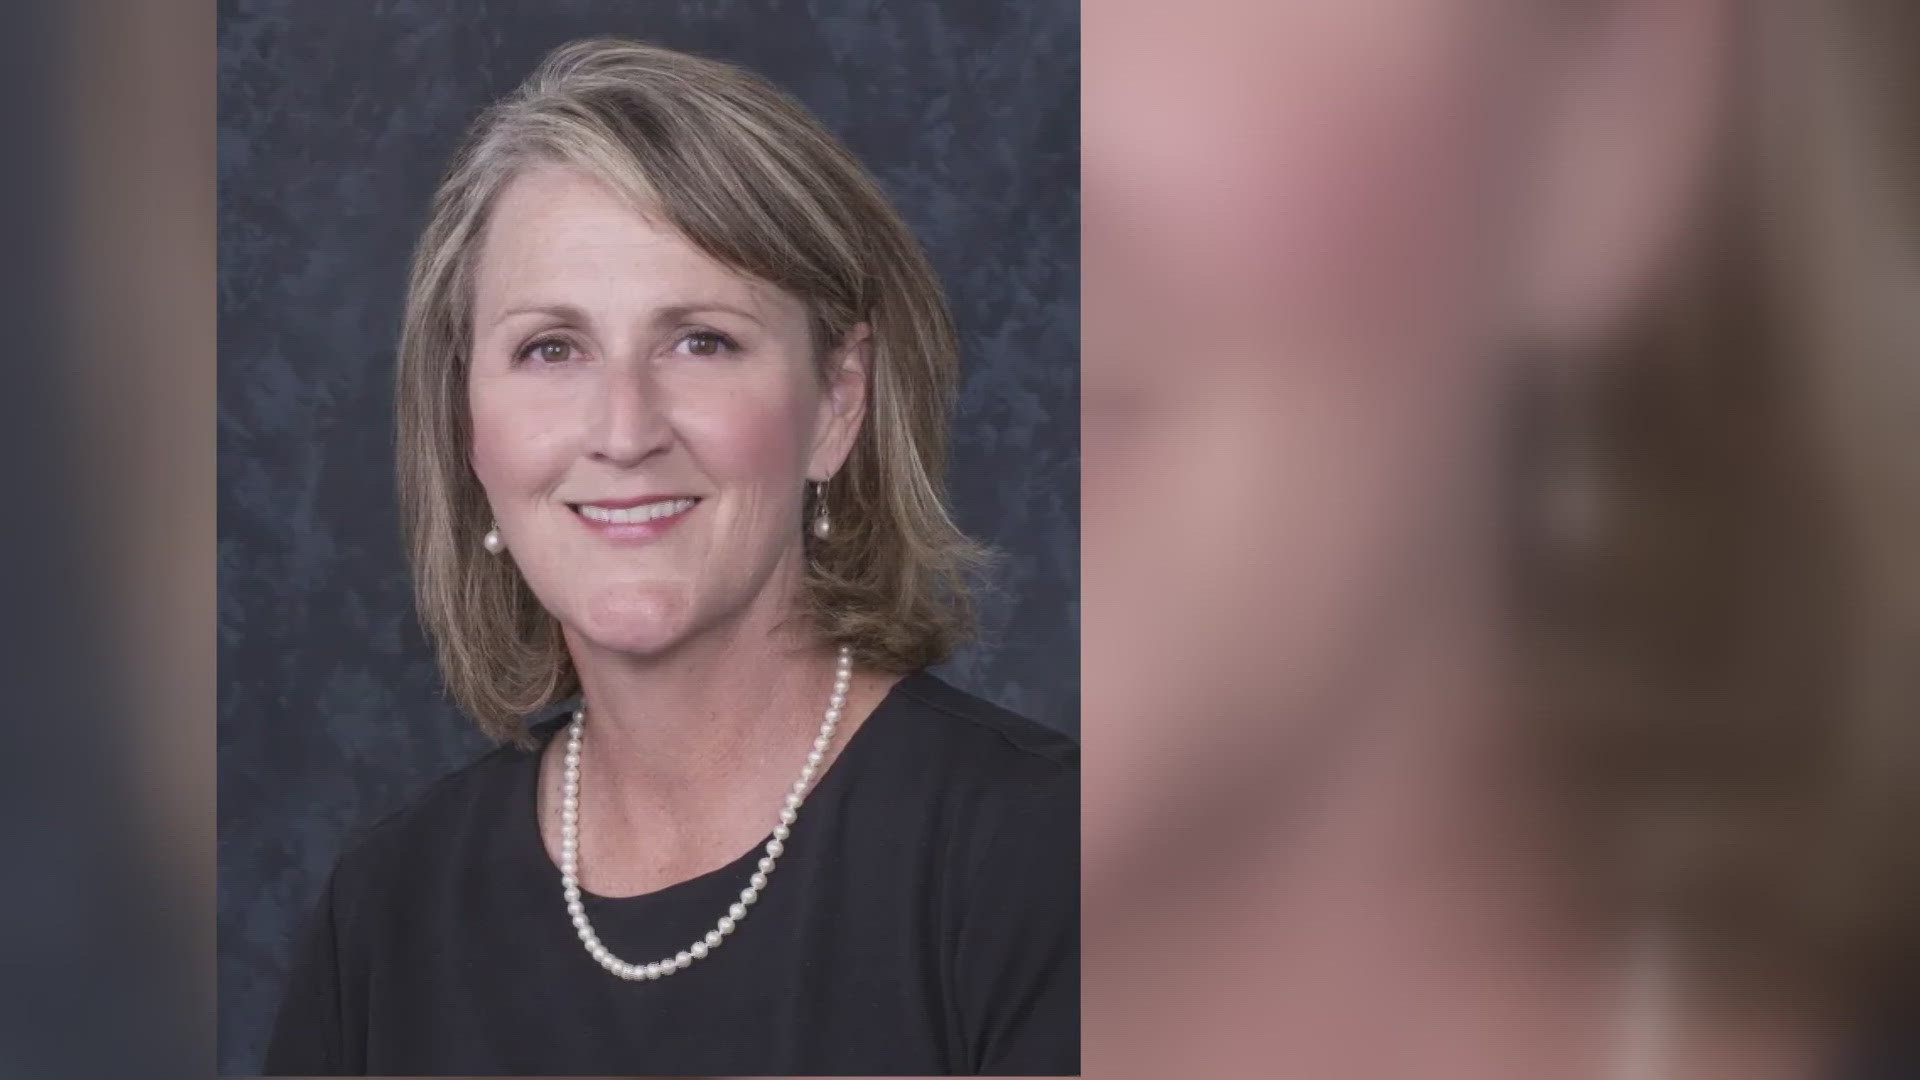 The Killeen ISD Board of Trustees named Dr. Jo Ann Fey as the lone finalist to be the district's next superintendent at a special-called meeting on Thursday, June 1.